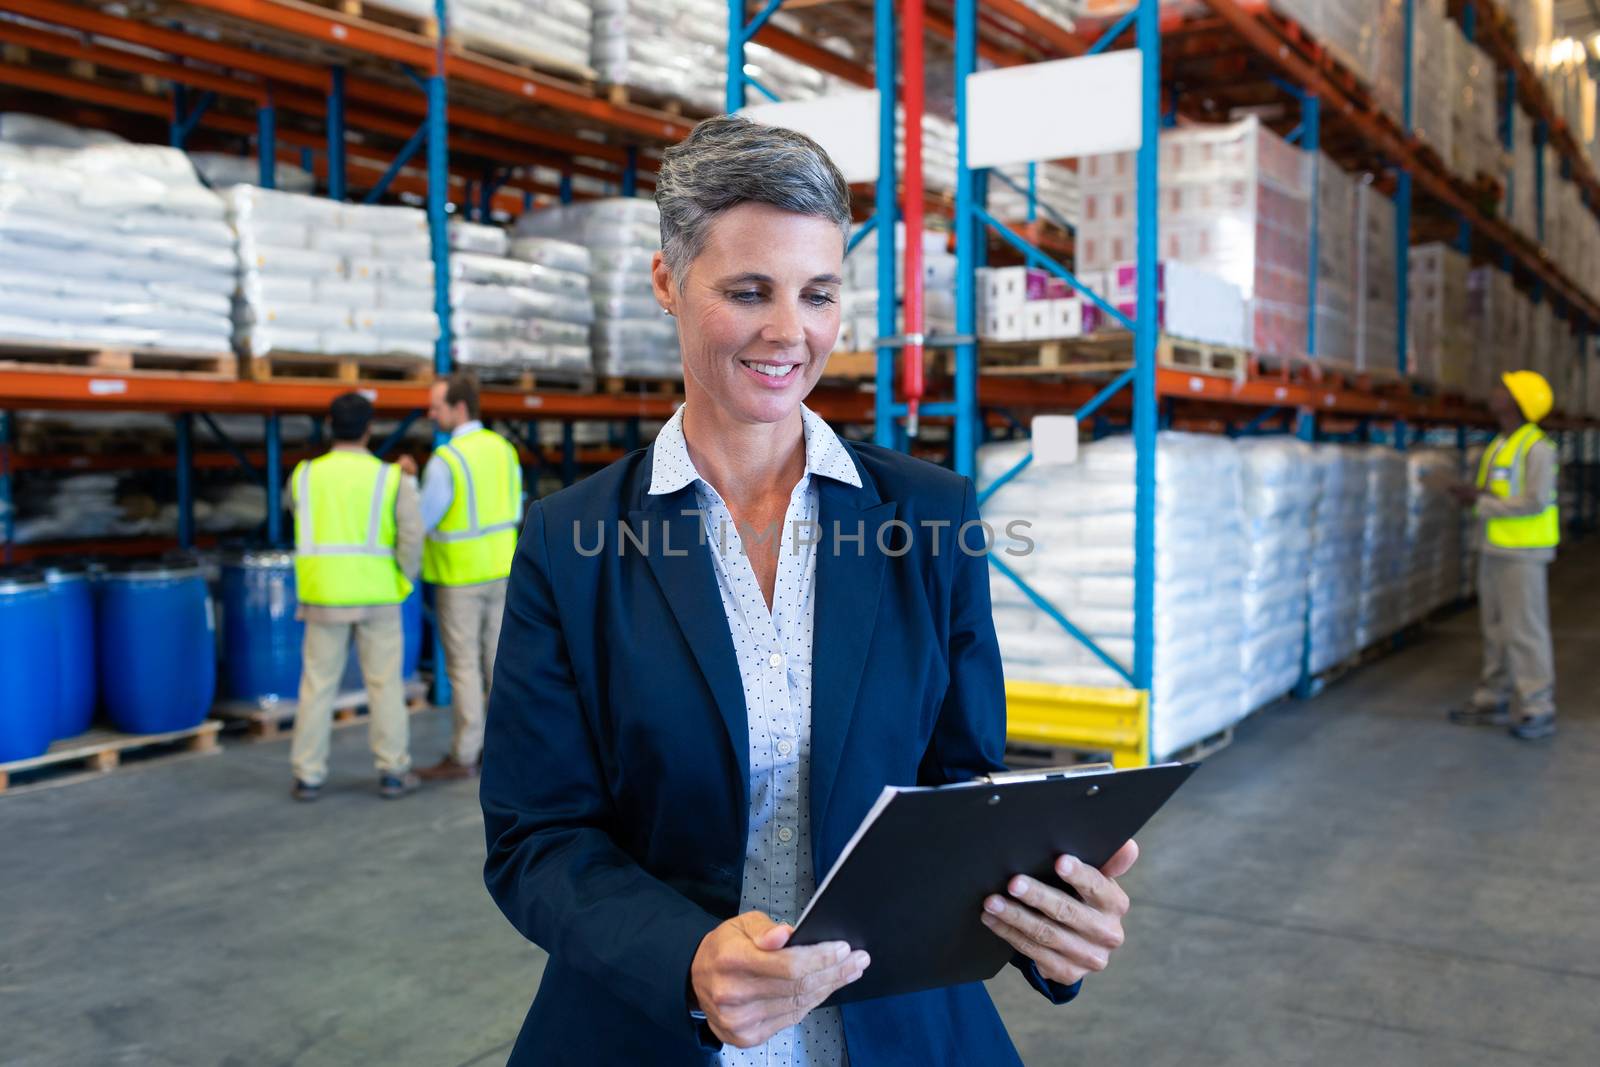 Female manager checking stocks on clipboard in warehouse by Wavebreakmedia